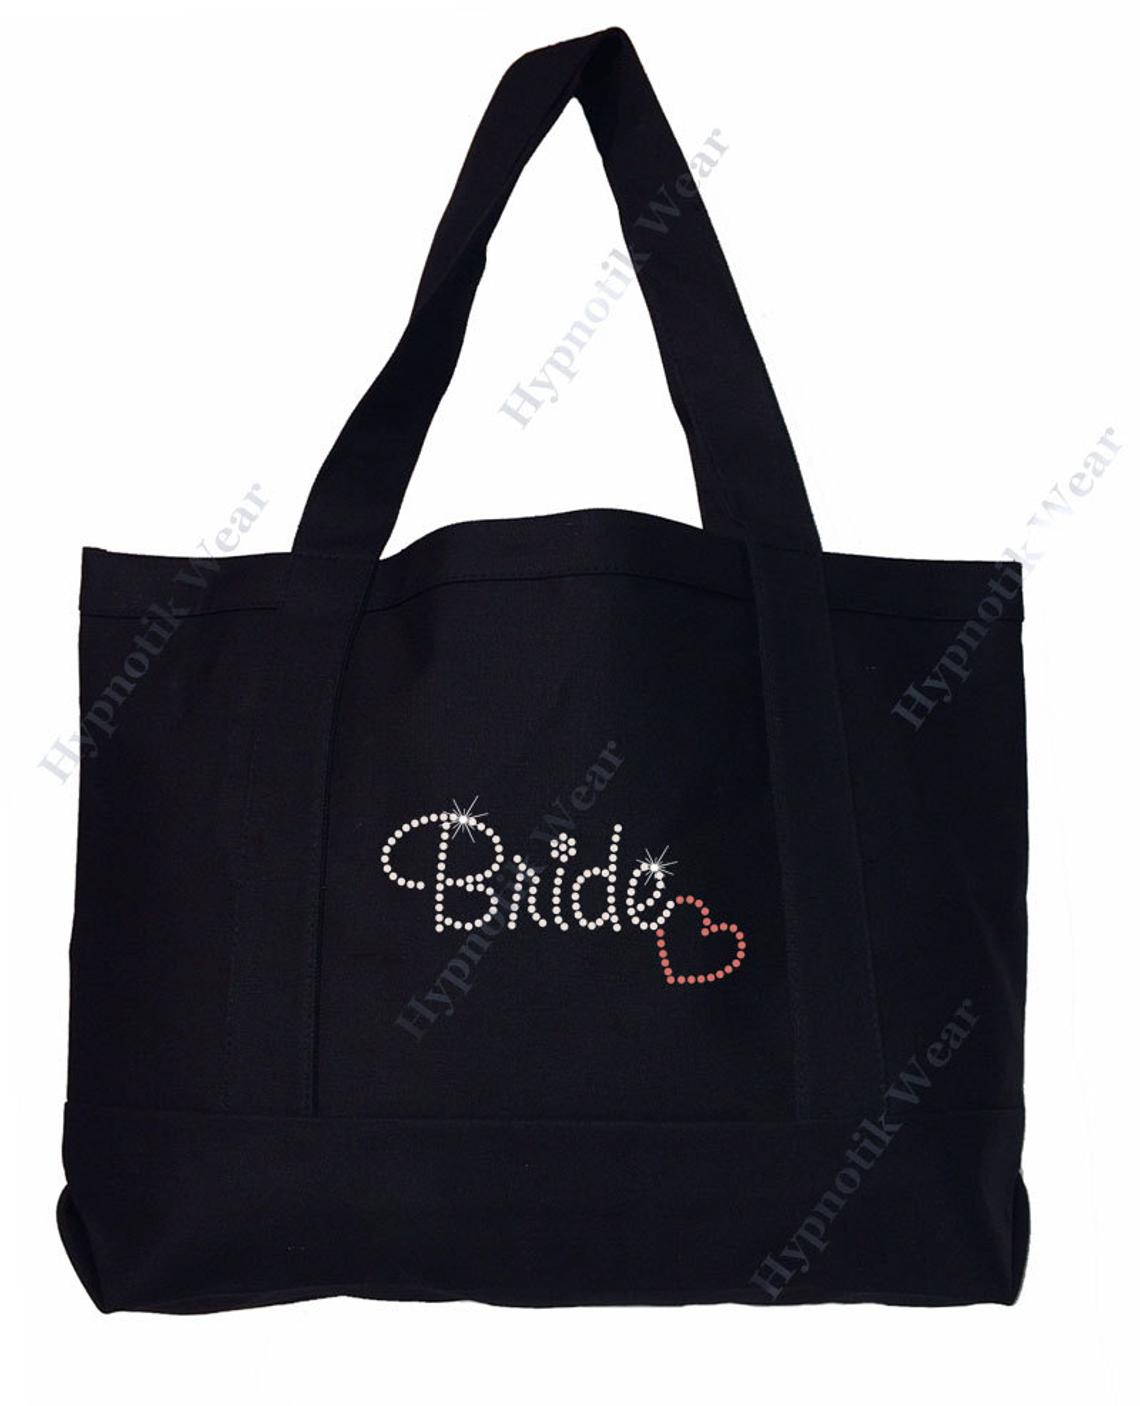 Rhinestone Sturdy Tote Bag with Zipper & Front Pocket " Bride with Heart" Honey Moon Bling